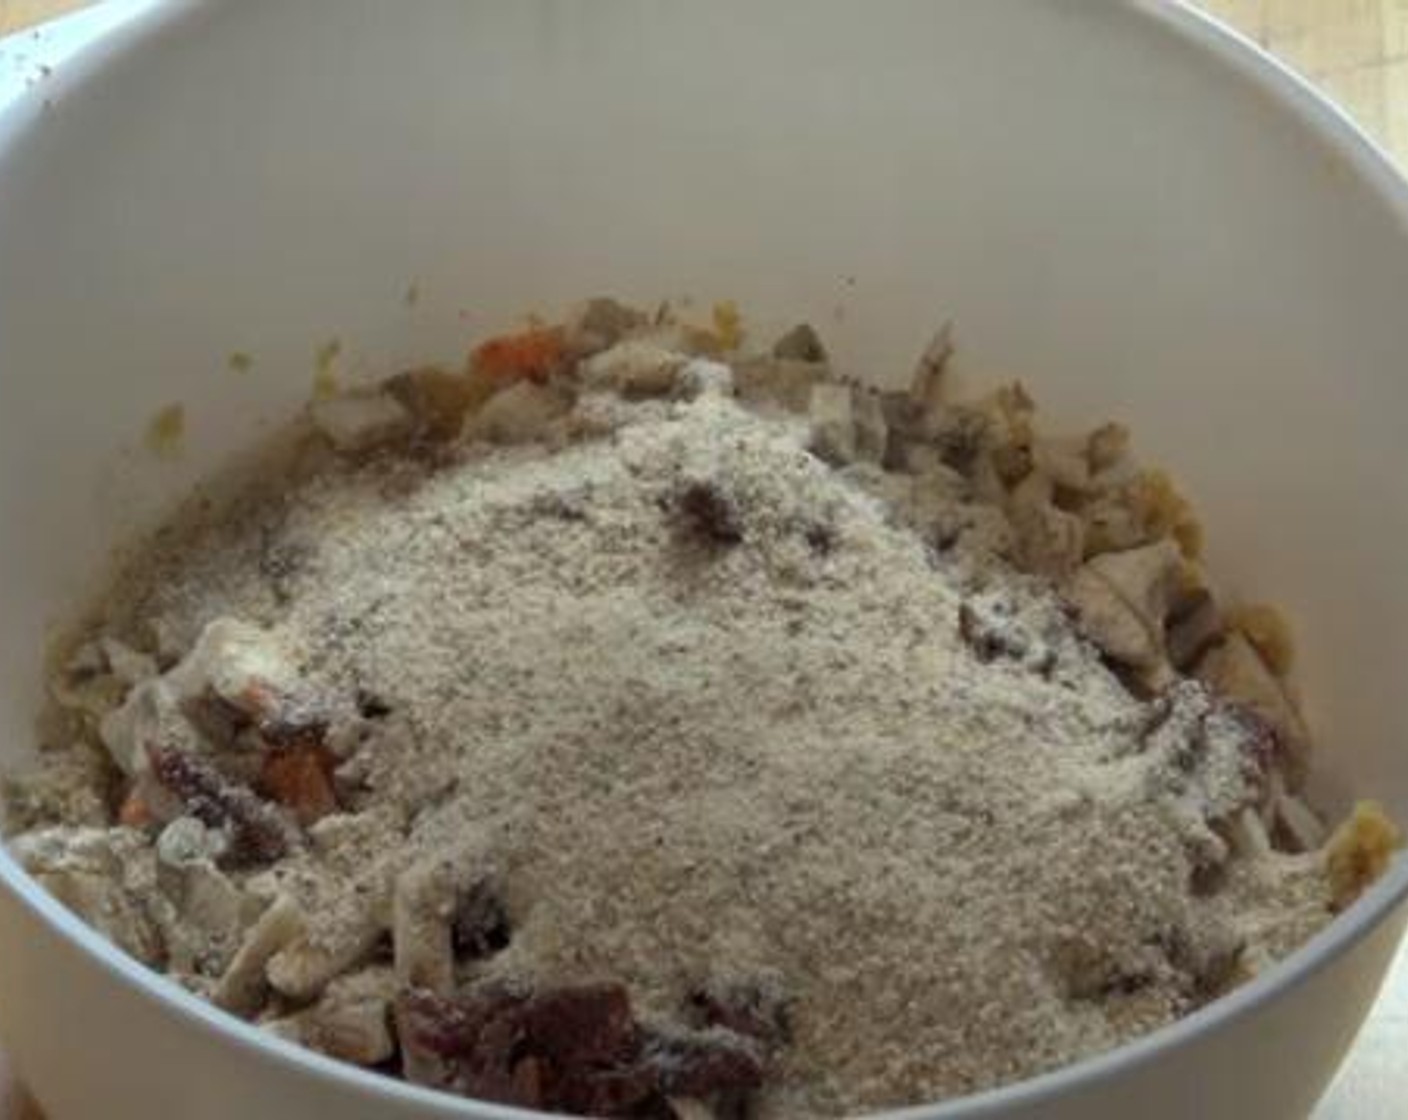 step 1 Into a bowl, add the Canned Chickpeas (2 cups) and gently mash them with a spoon. To that, add and mix the Garlic (1 clove), Carrot (1), Button Mushrooms (3), Sun-Dried Tomatoes (1/4 cup),{@10:} Ground Coriander (1 tsp), Paprika (1/2 tsp),Breadcrumbs (1 cup), Salt (to taste) and Ground Black Pepper (to taste).